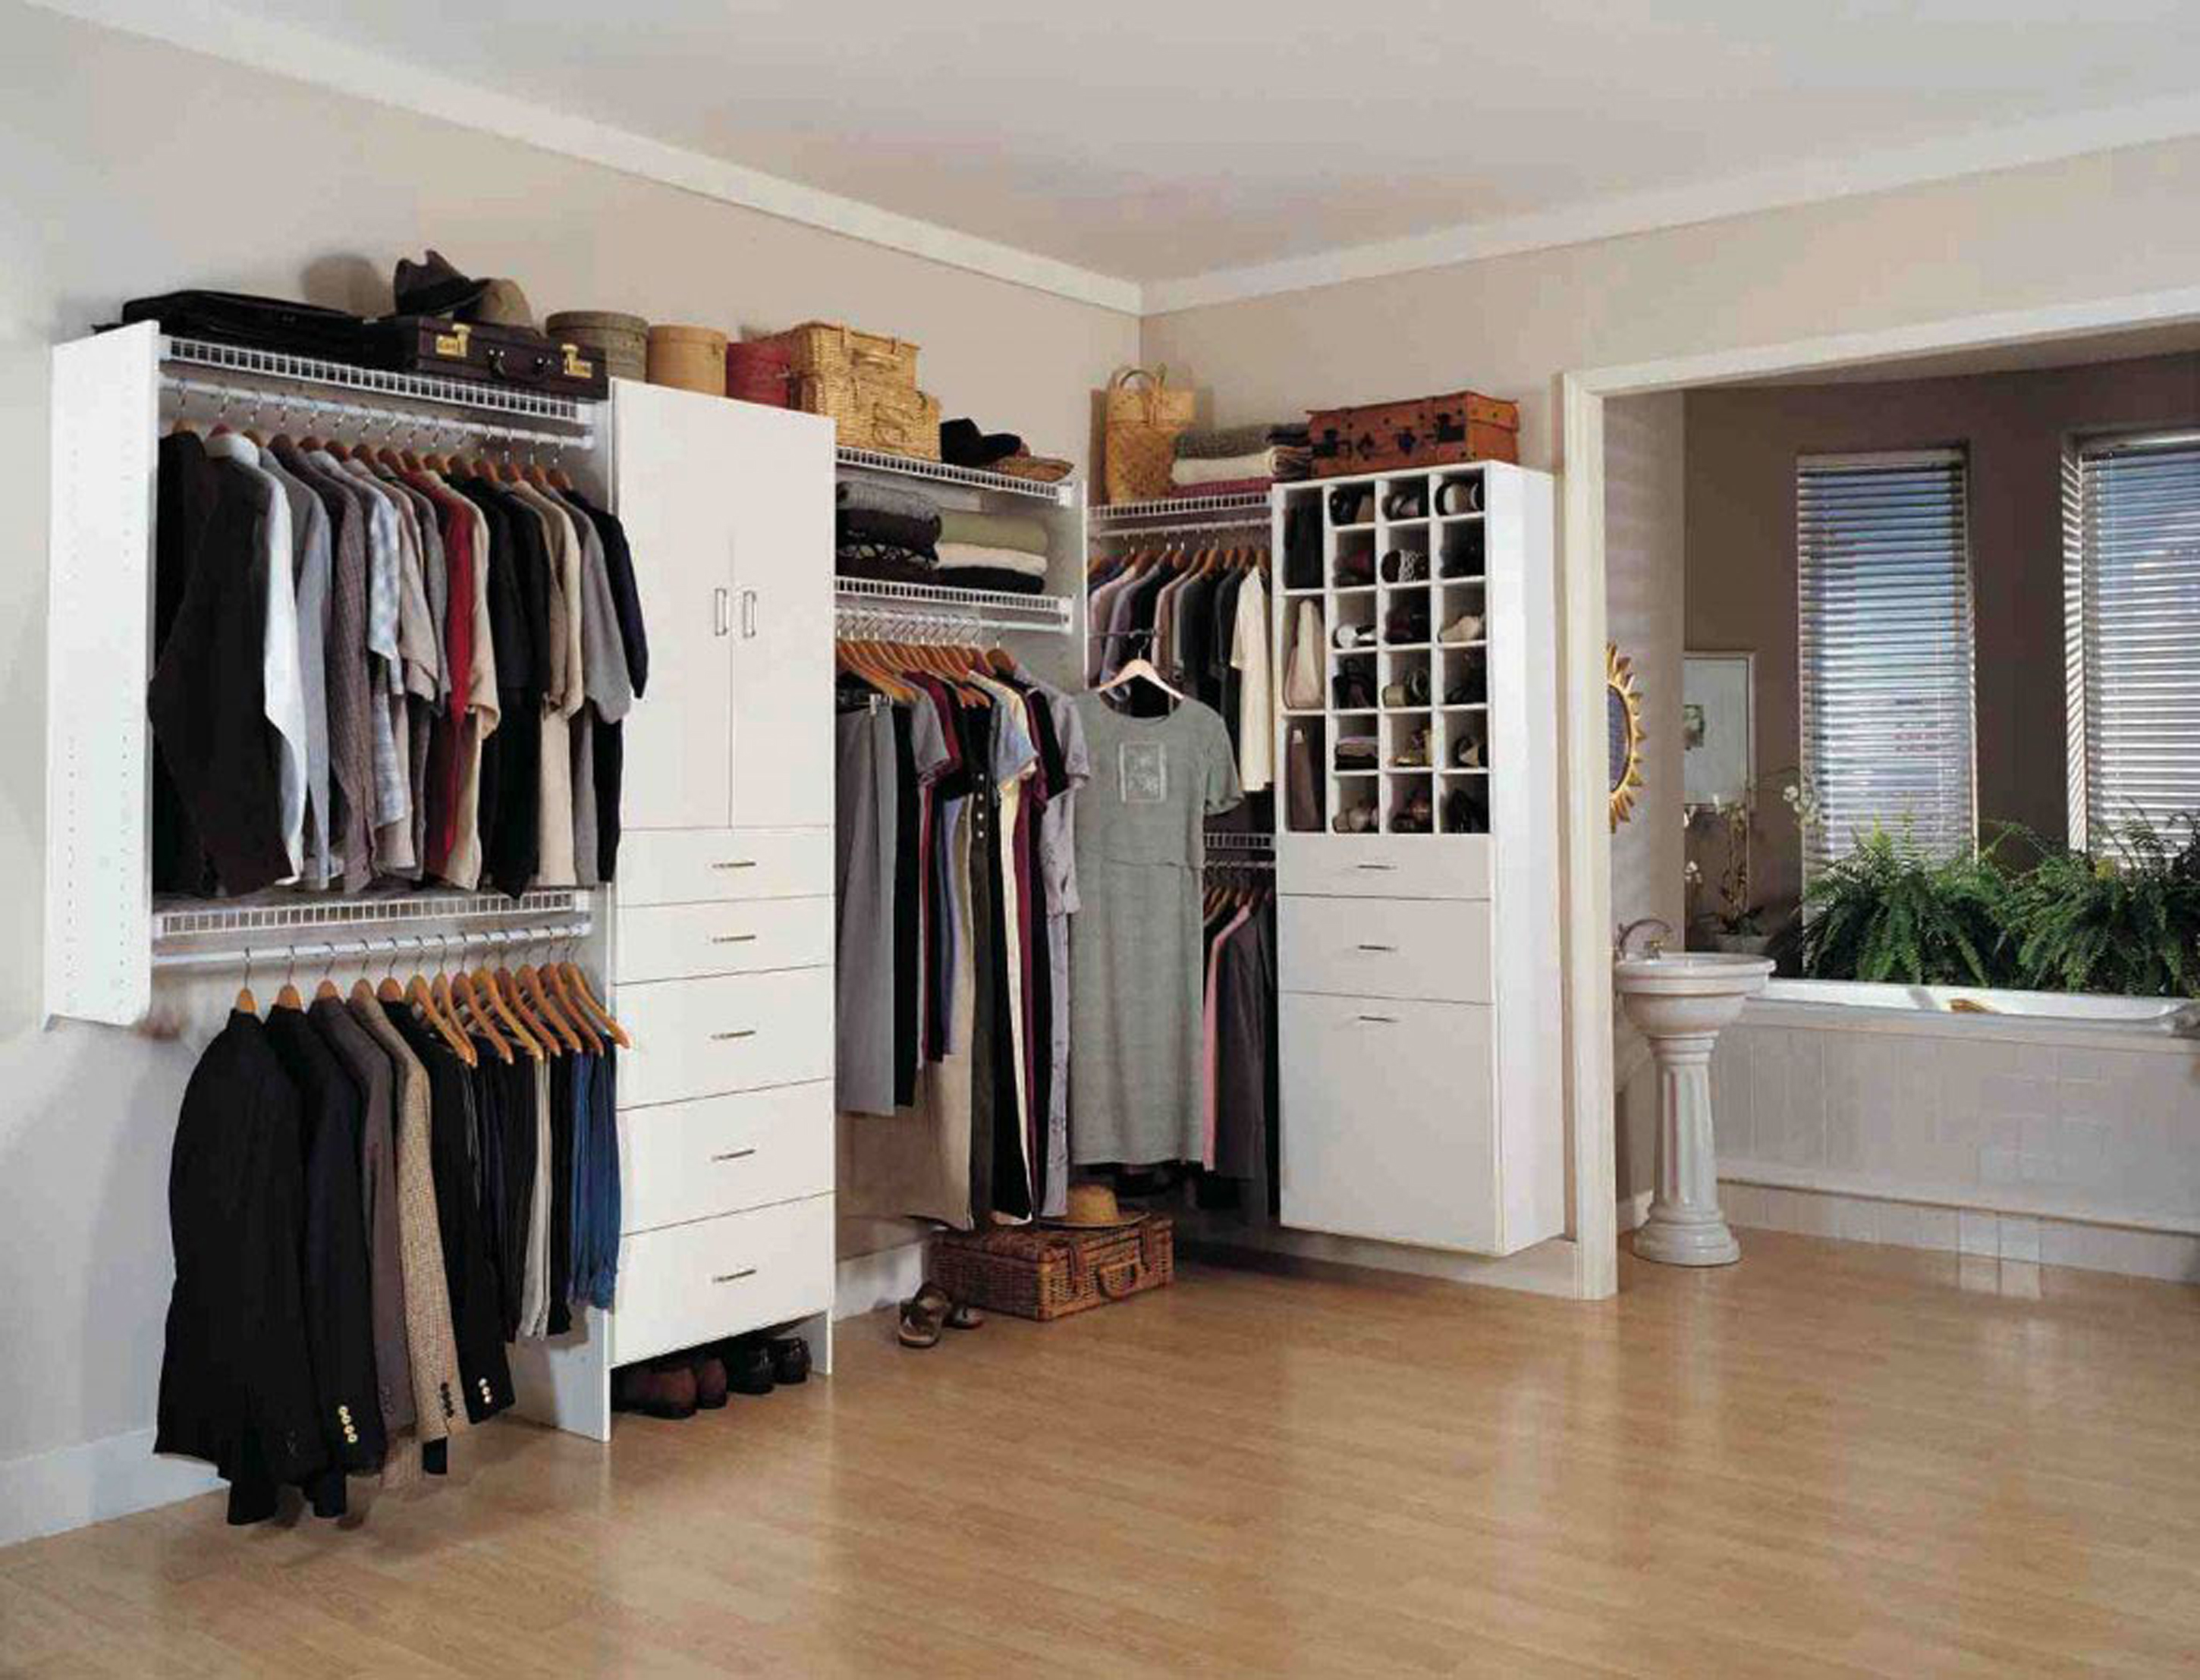 What's Wrong With My Closet? - Olè Decor